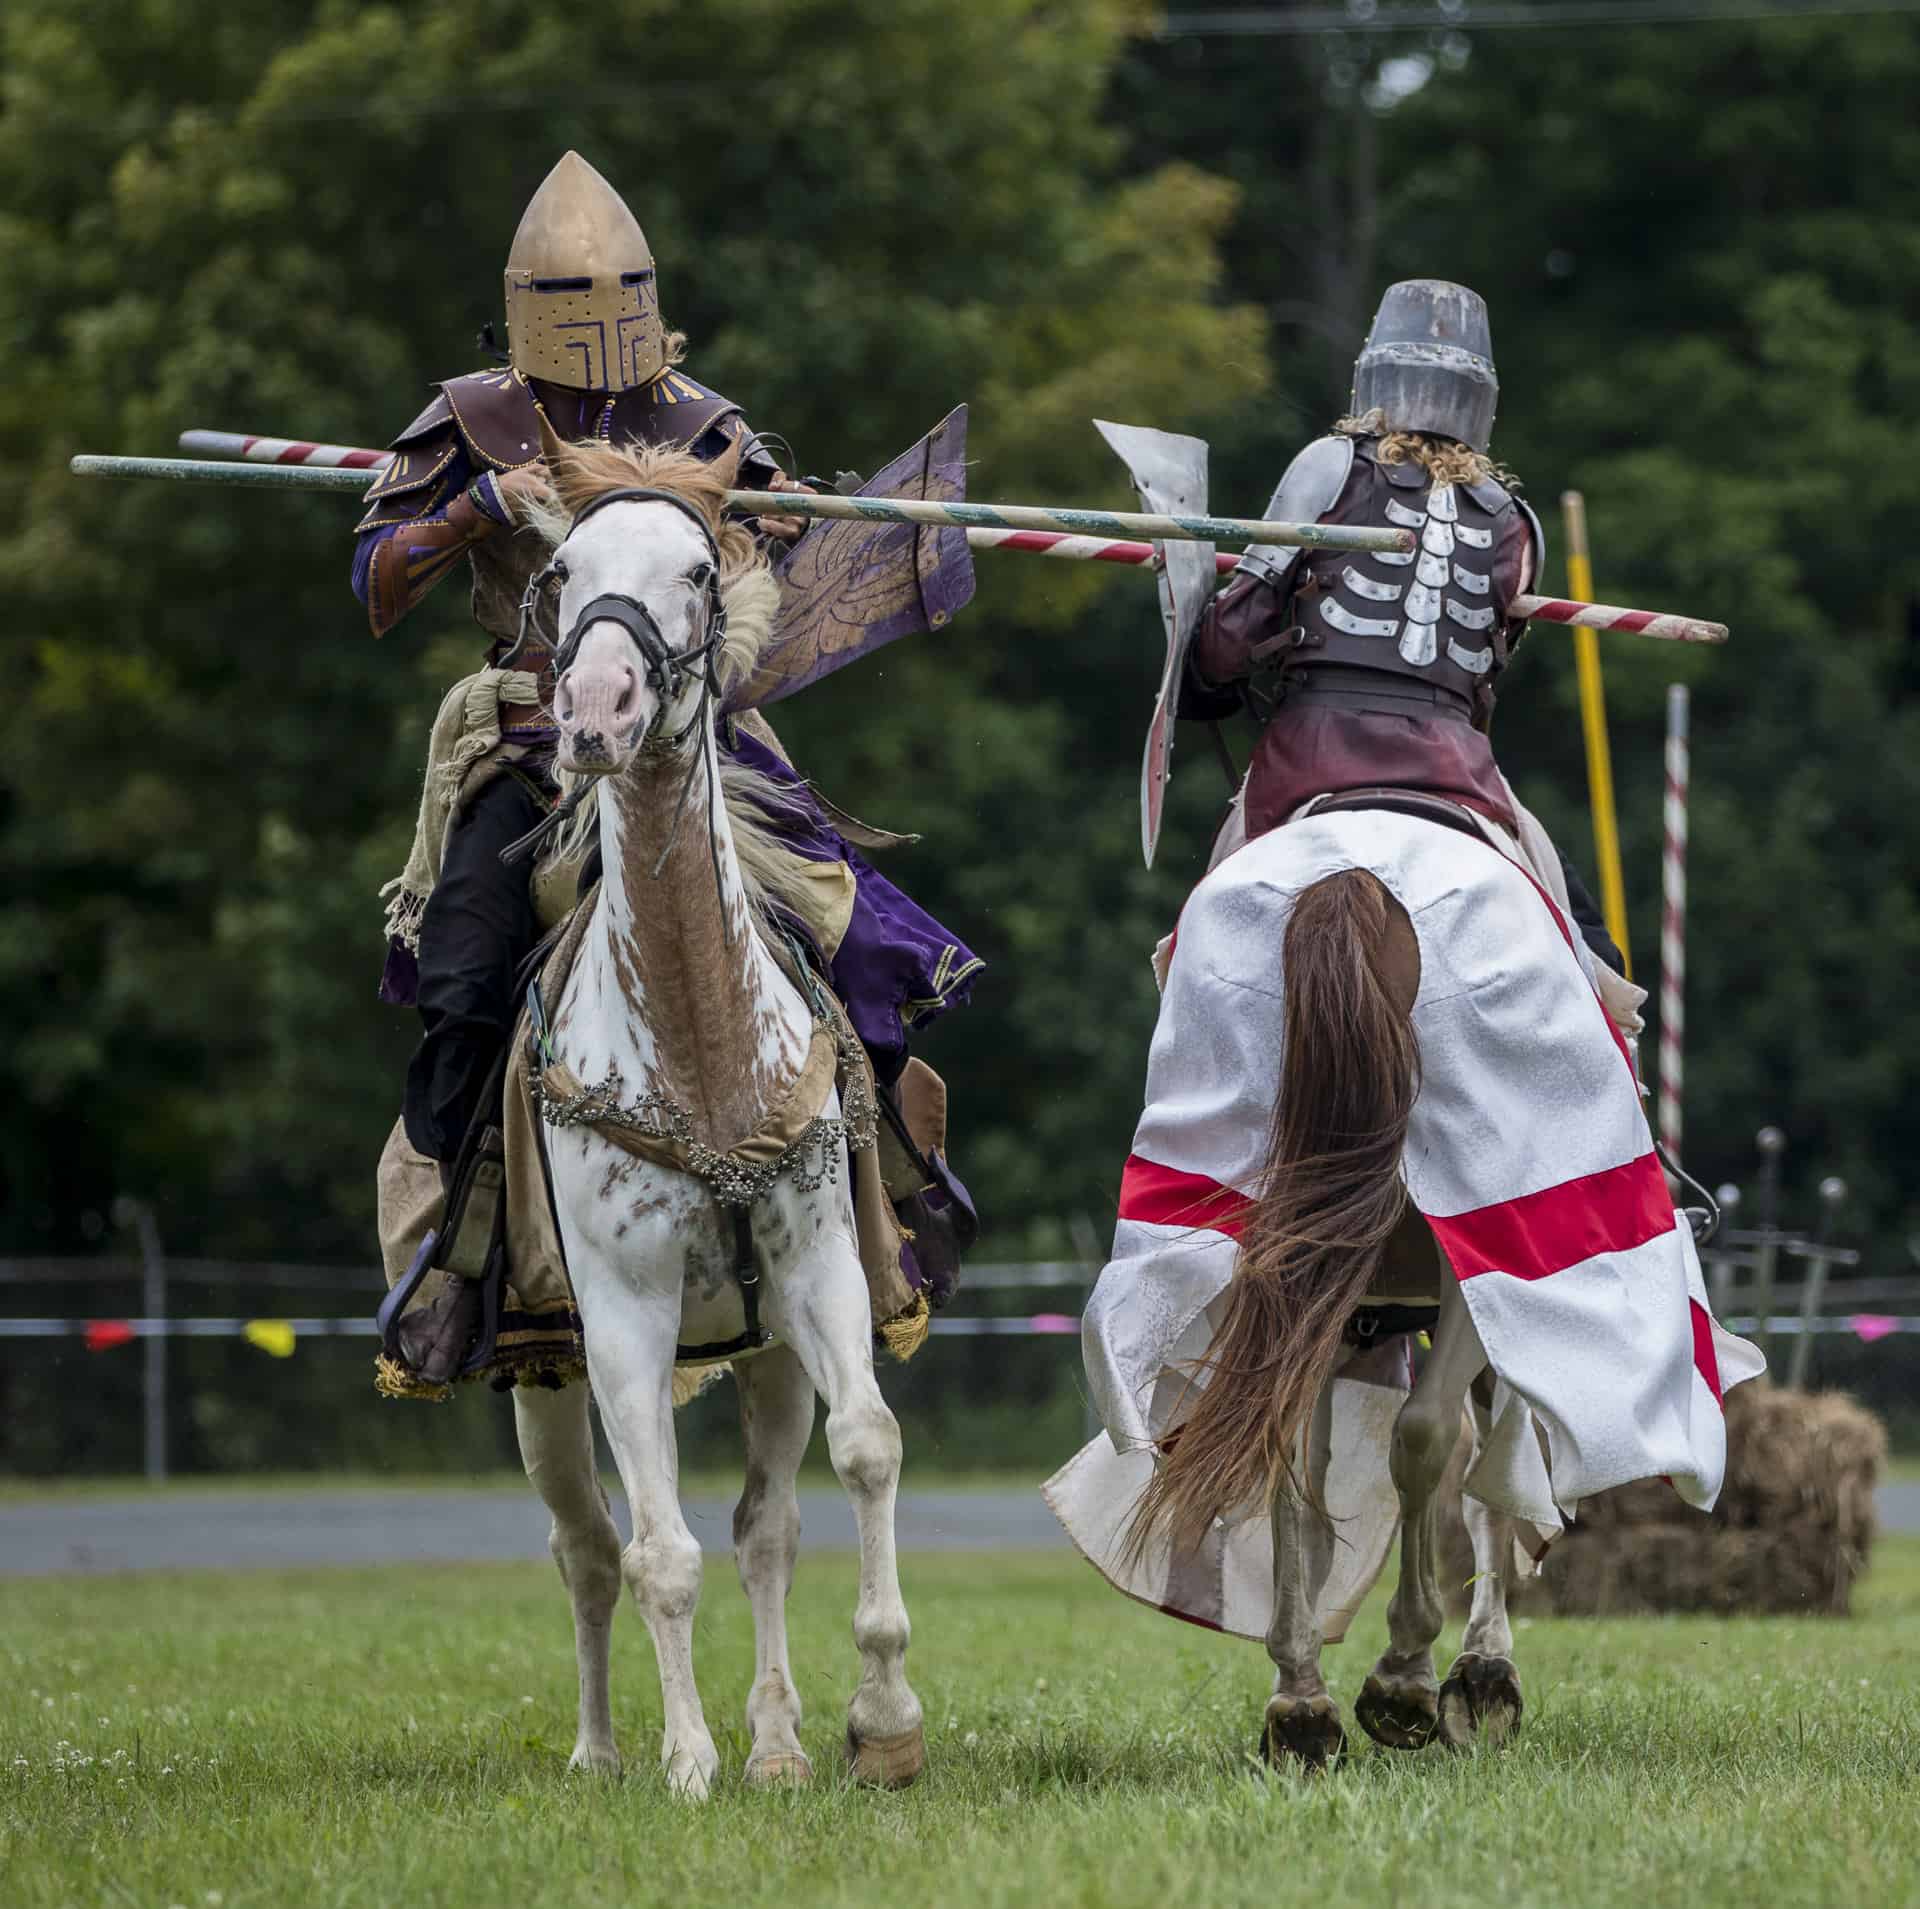 two jousters with lances hitting each other on horseback